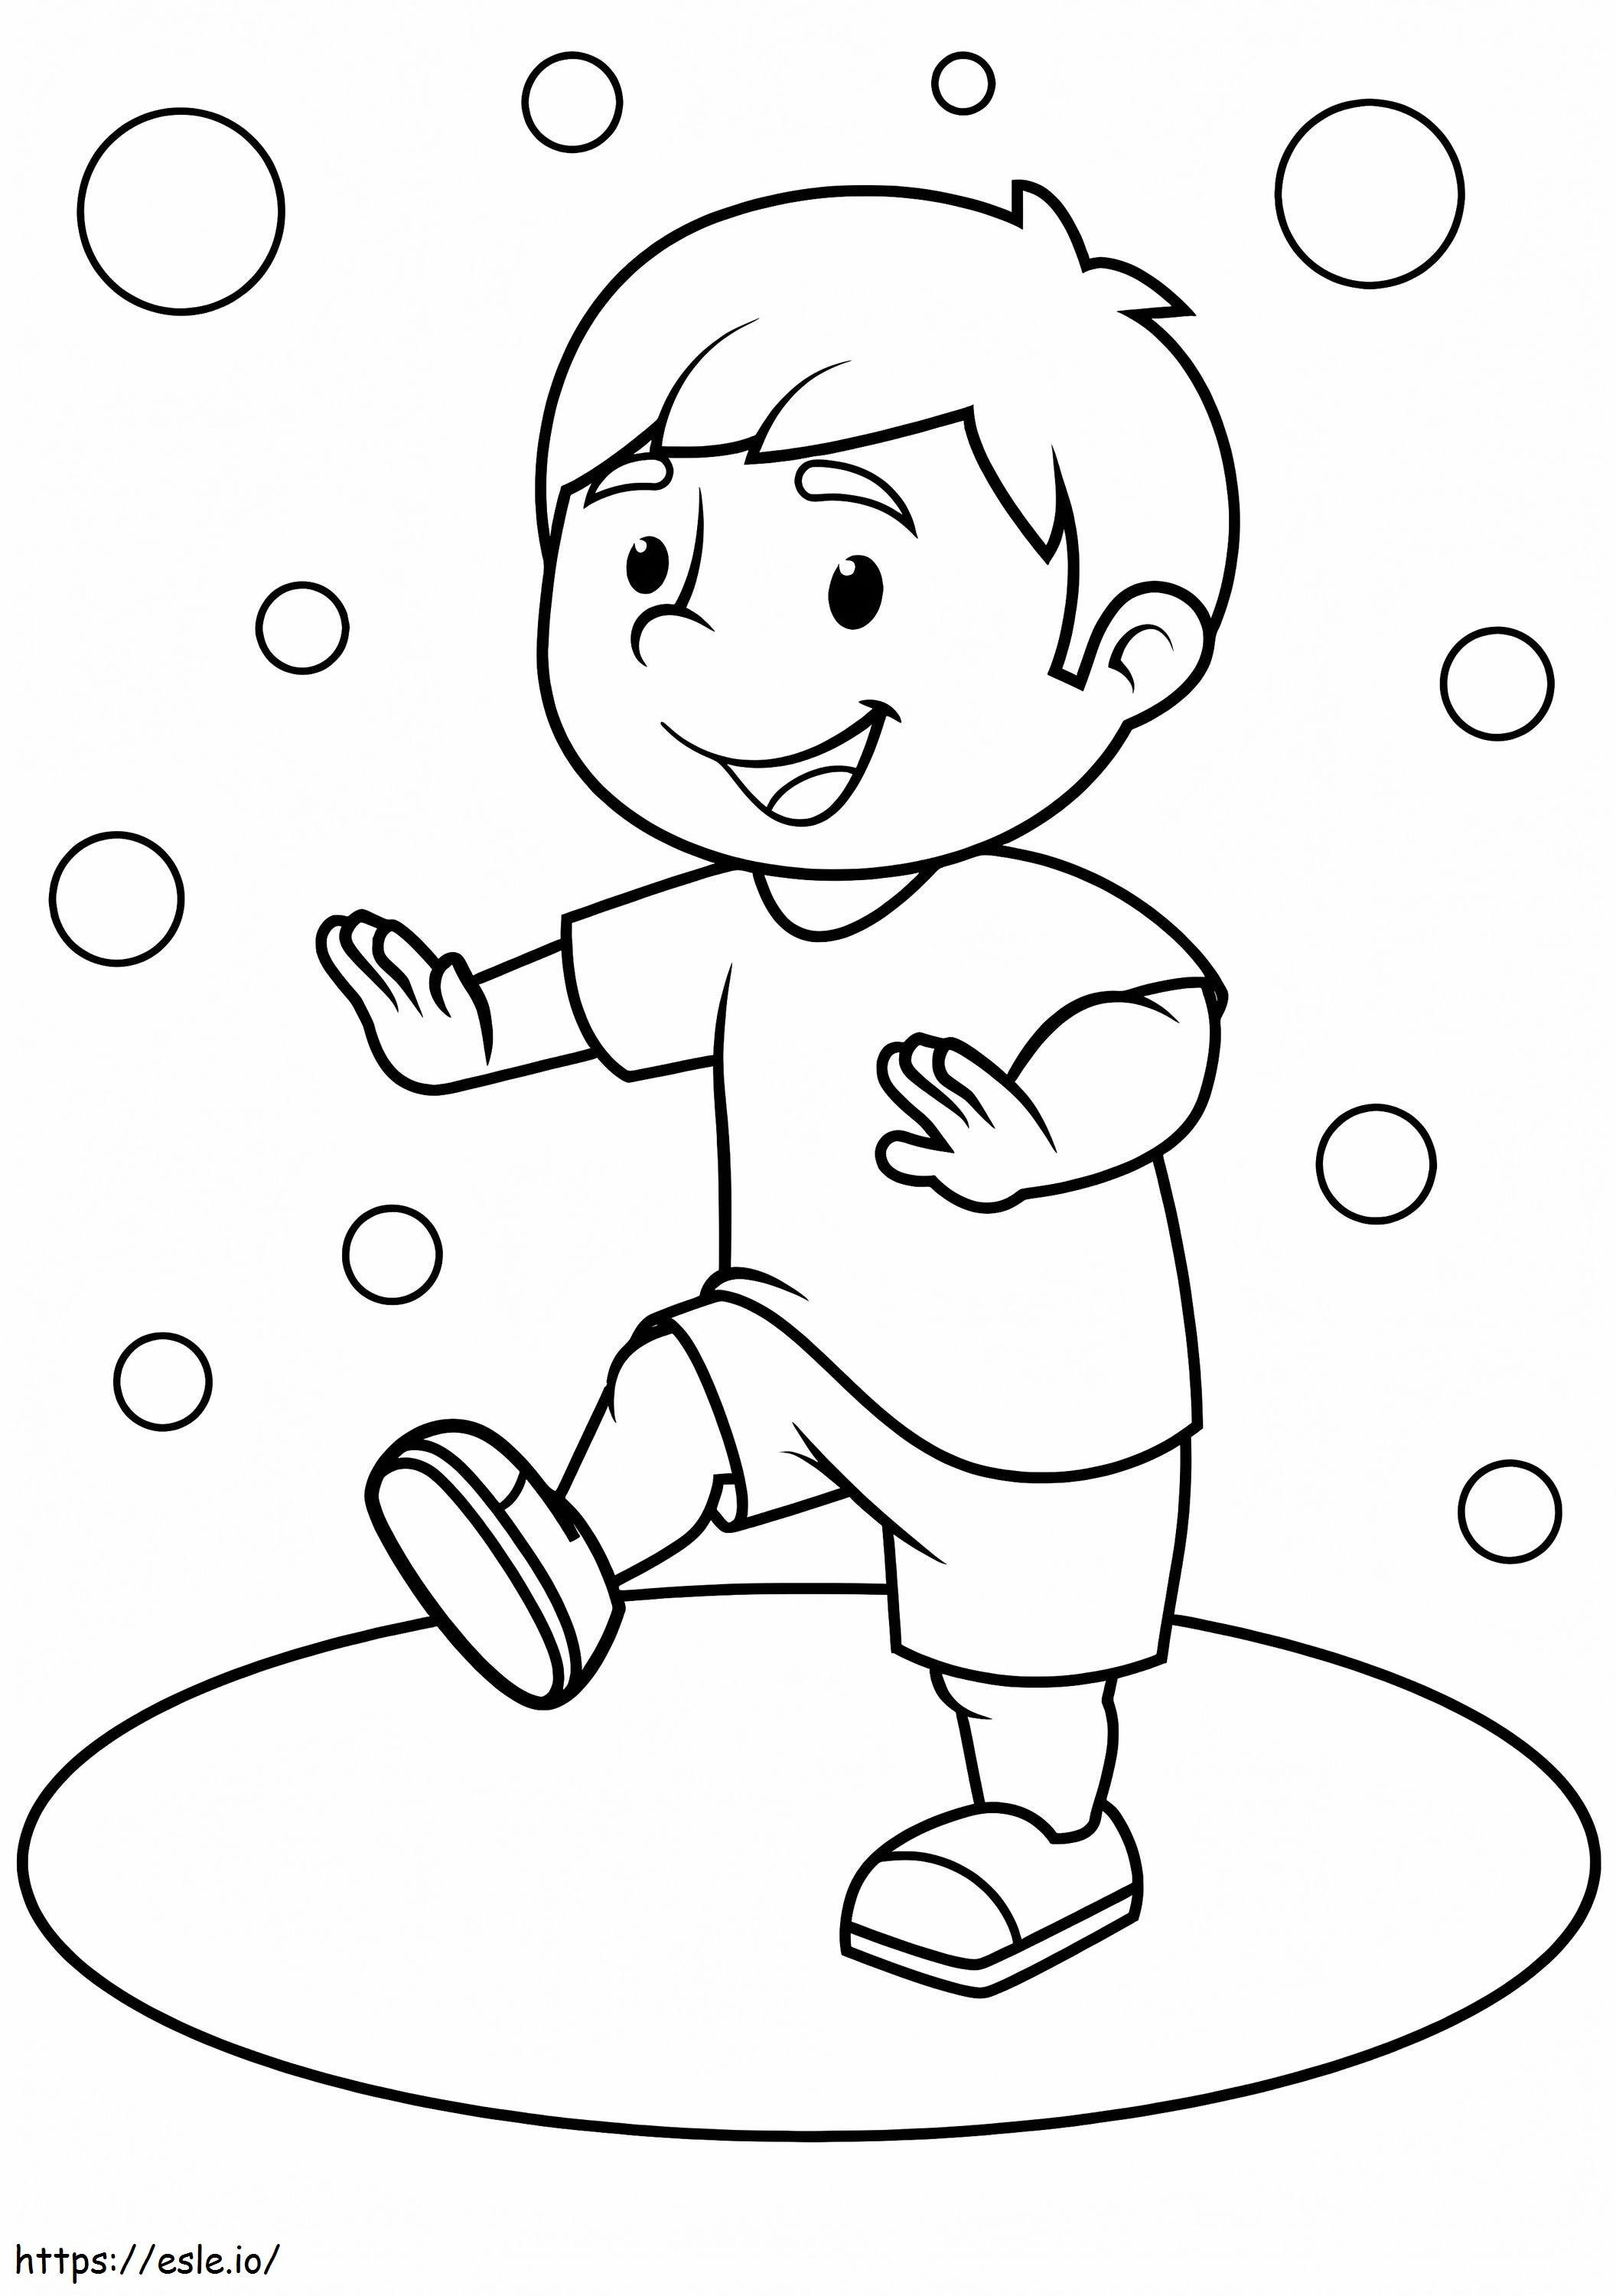 Little Dancer coloring page